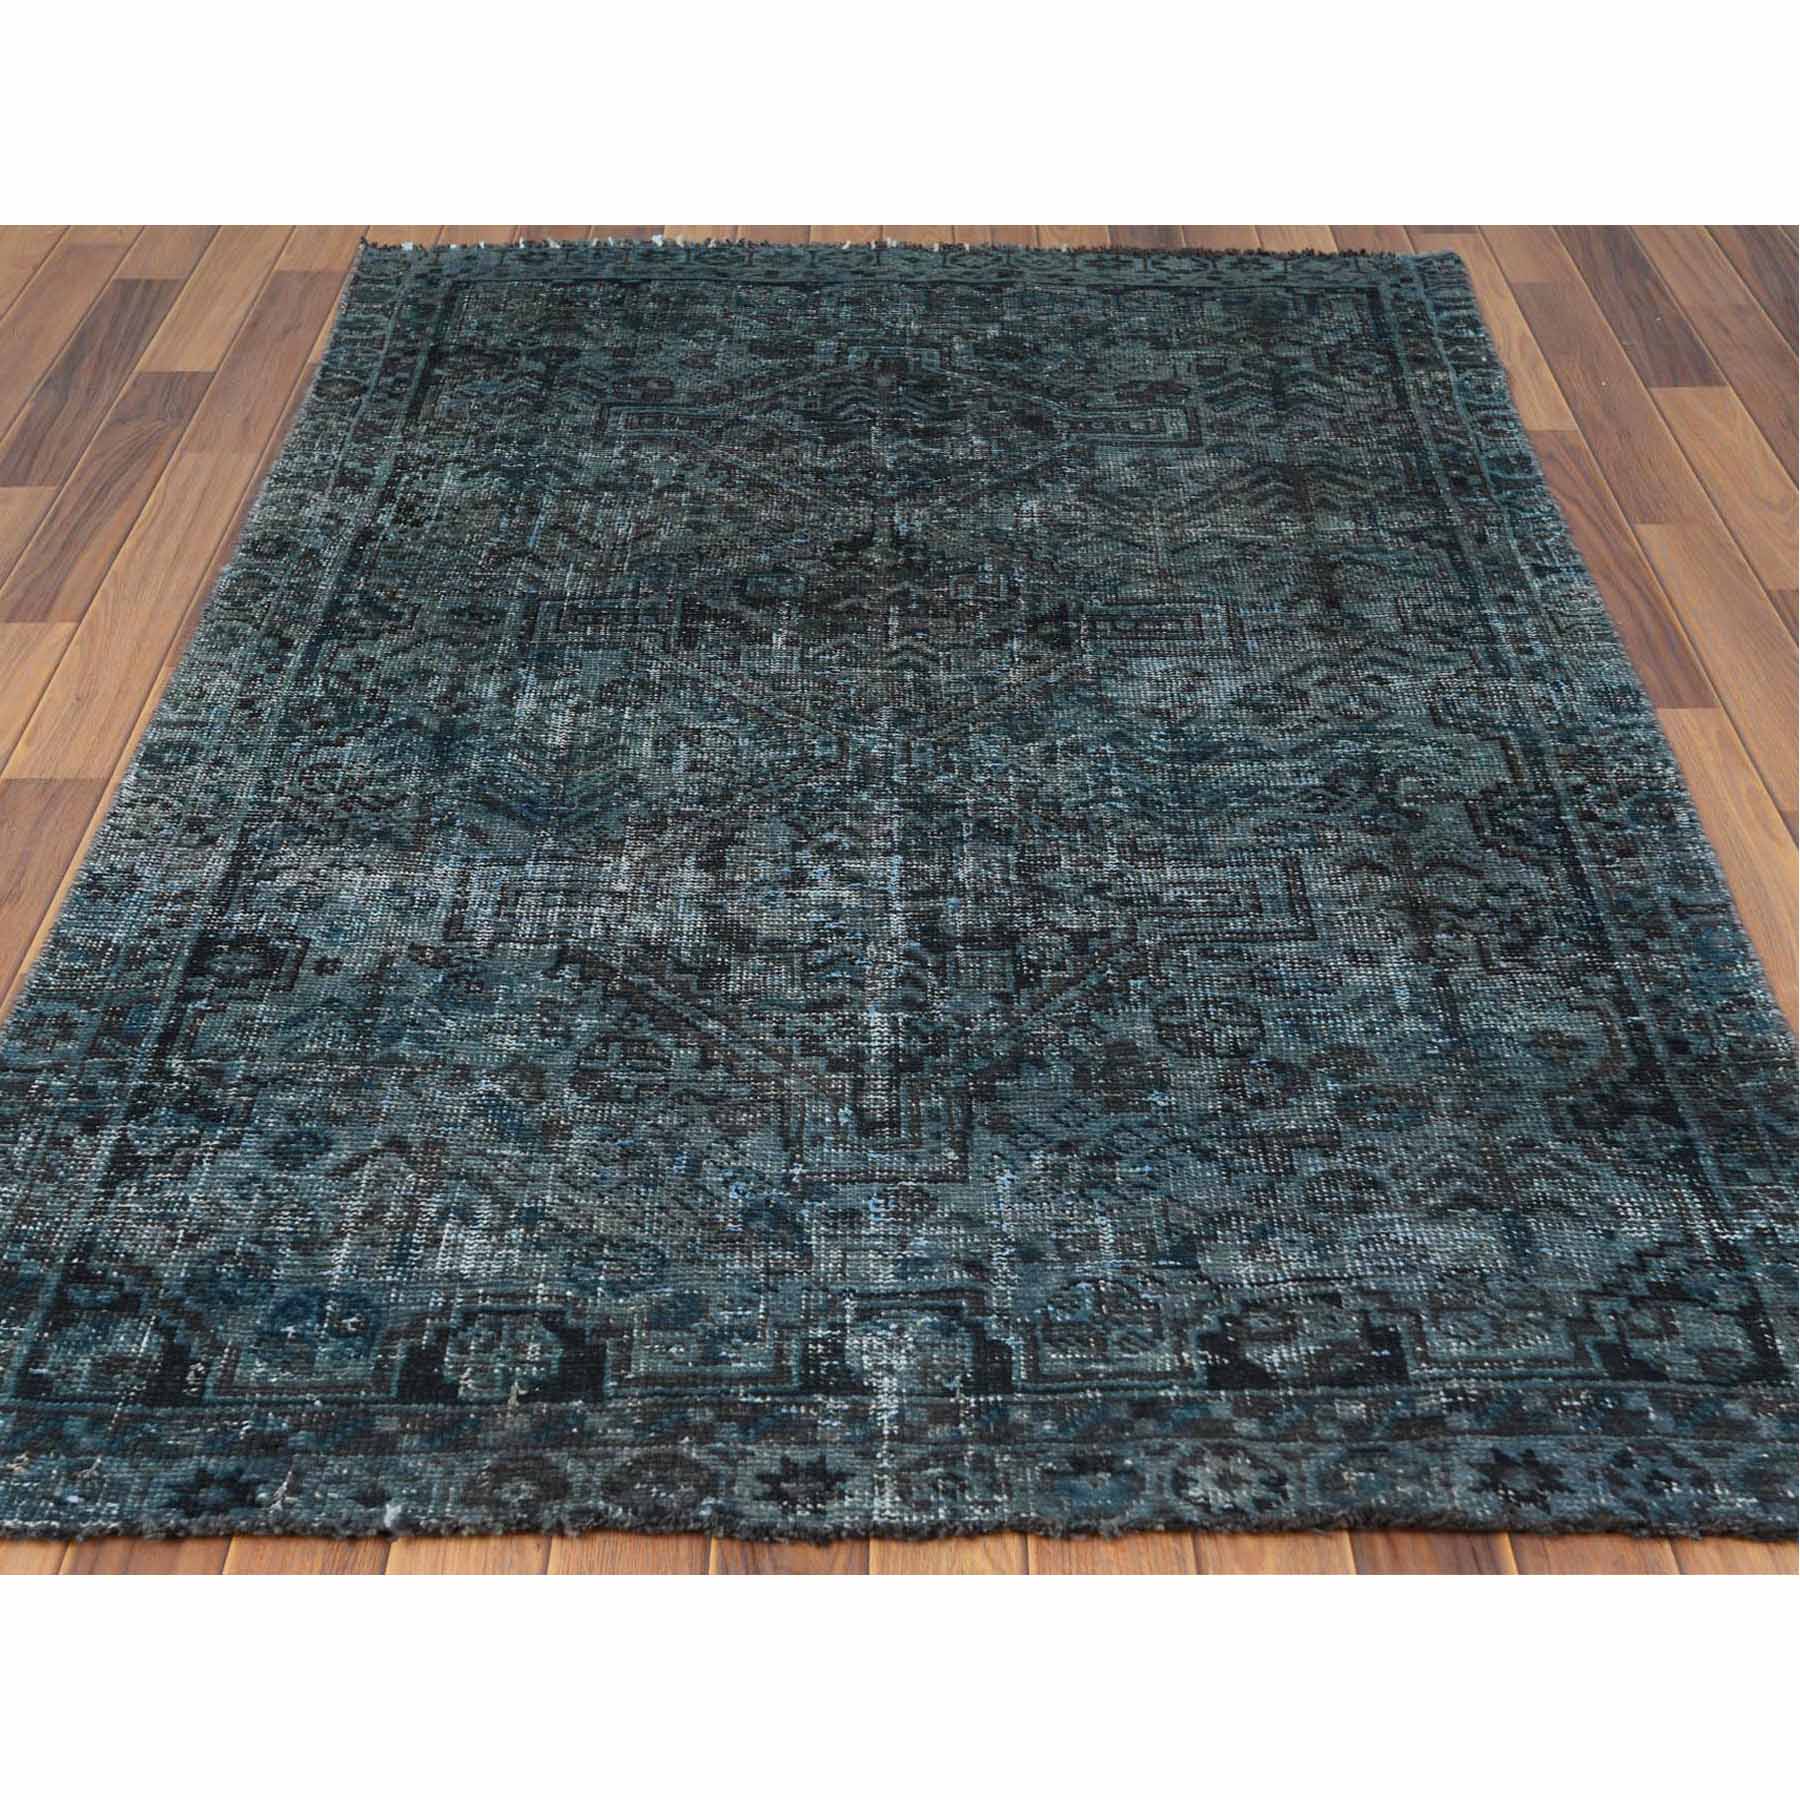 Overdyed-Vintage-Hand-Knotted-Rug-302770